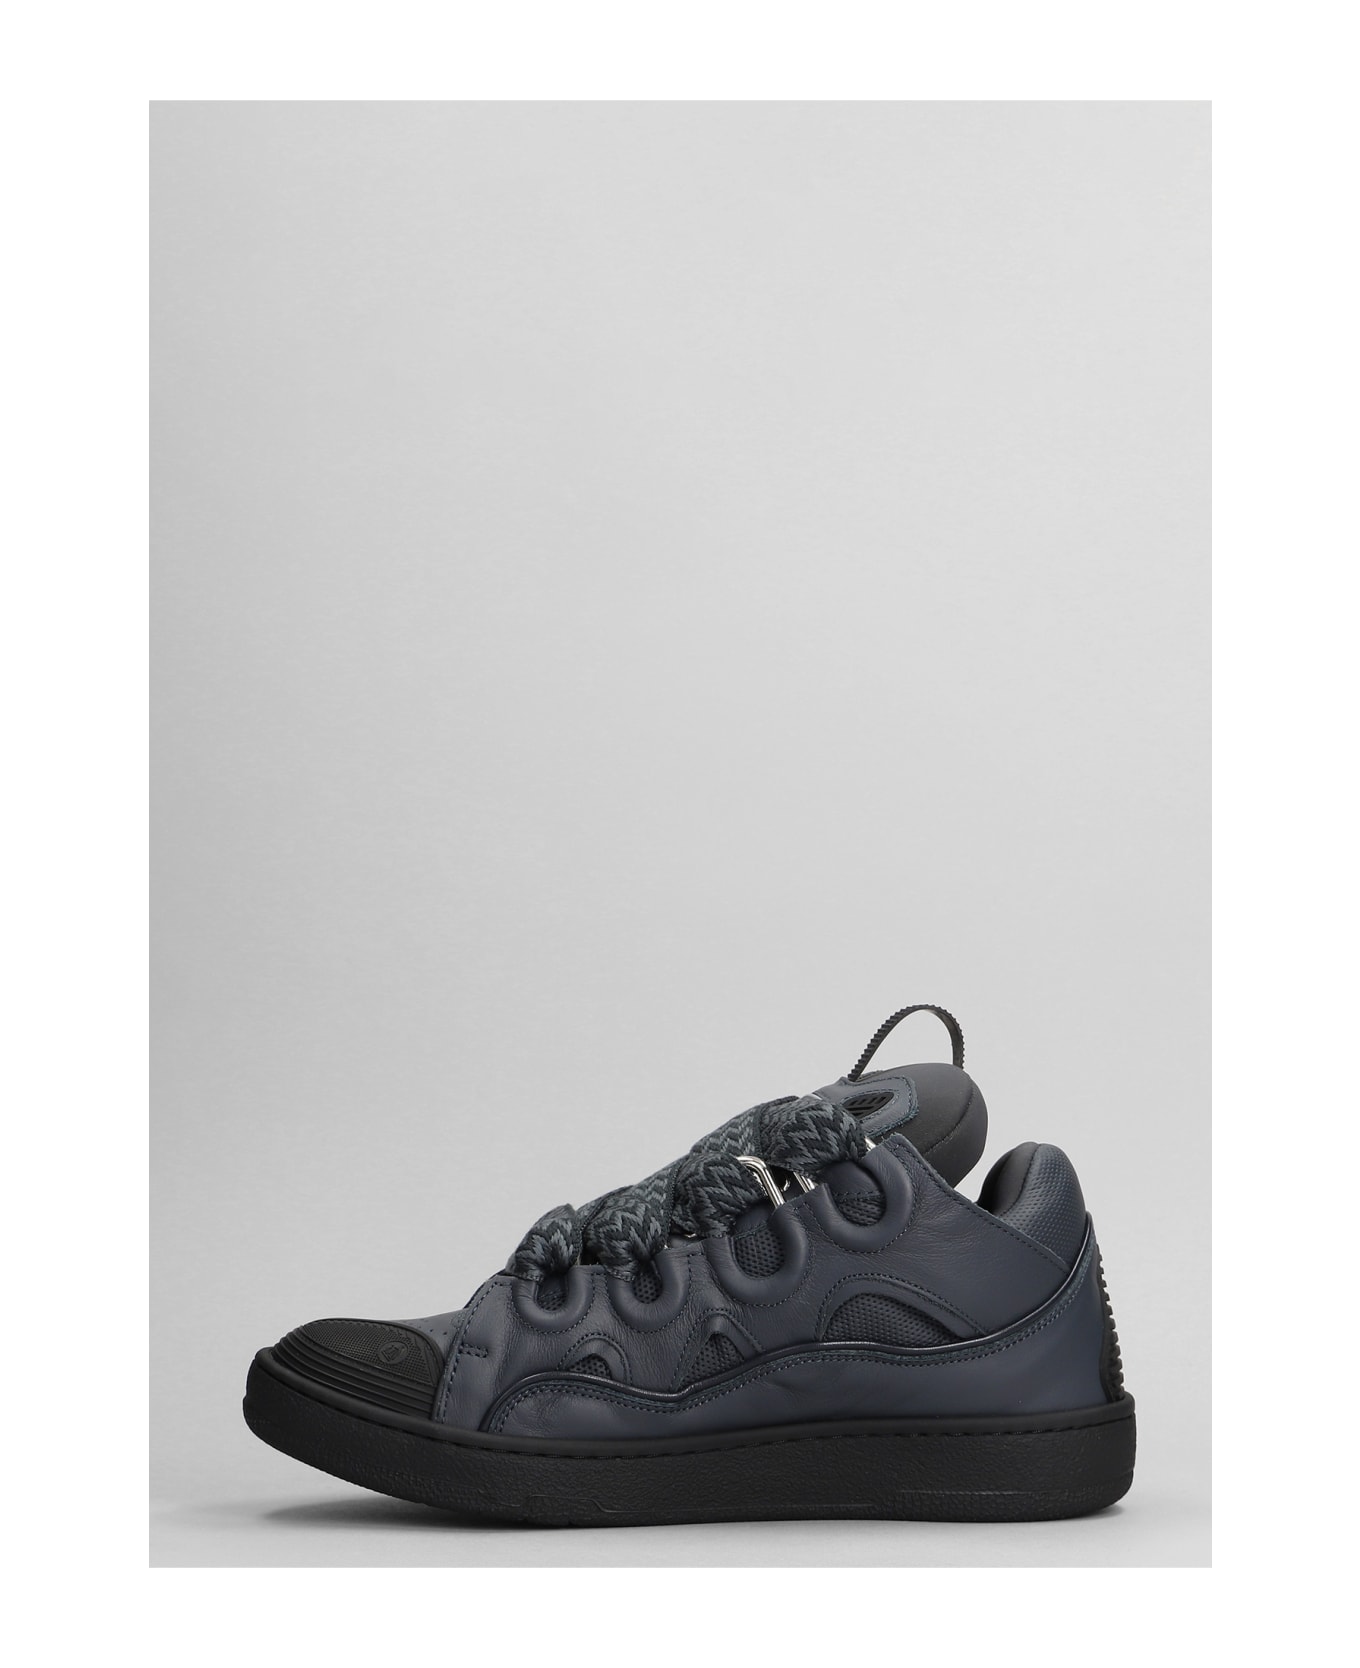 Lanvin Curb Sneakers In Grey Leather - grey スニーカー